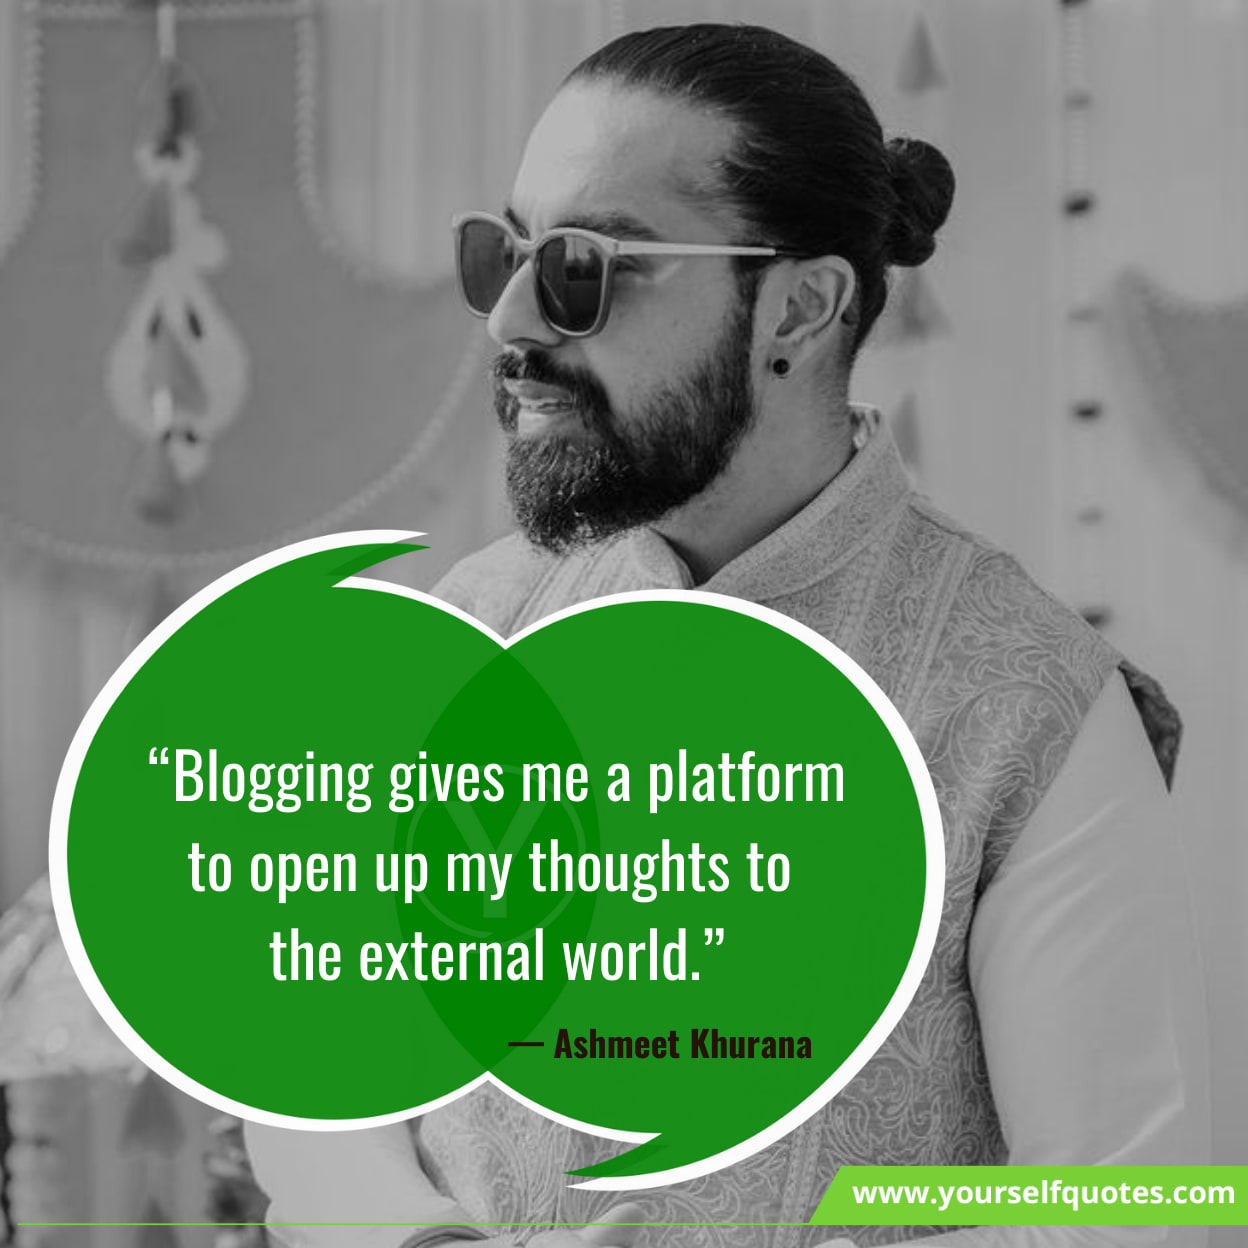 Inspiring Quotes About Blogging